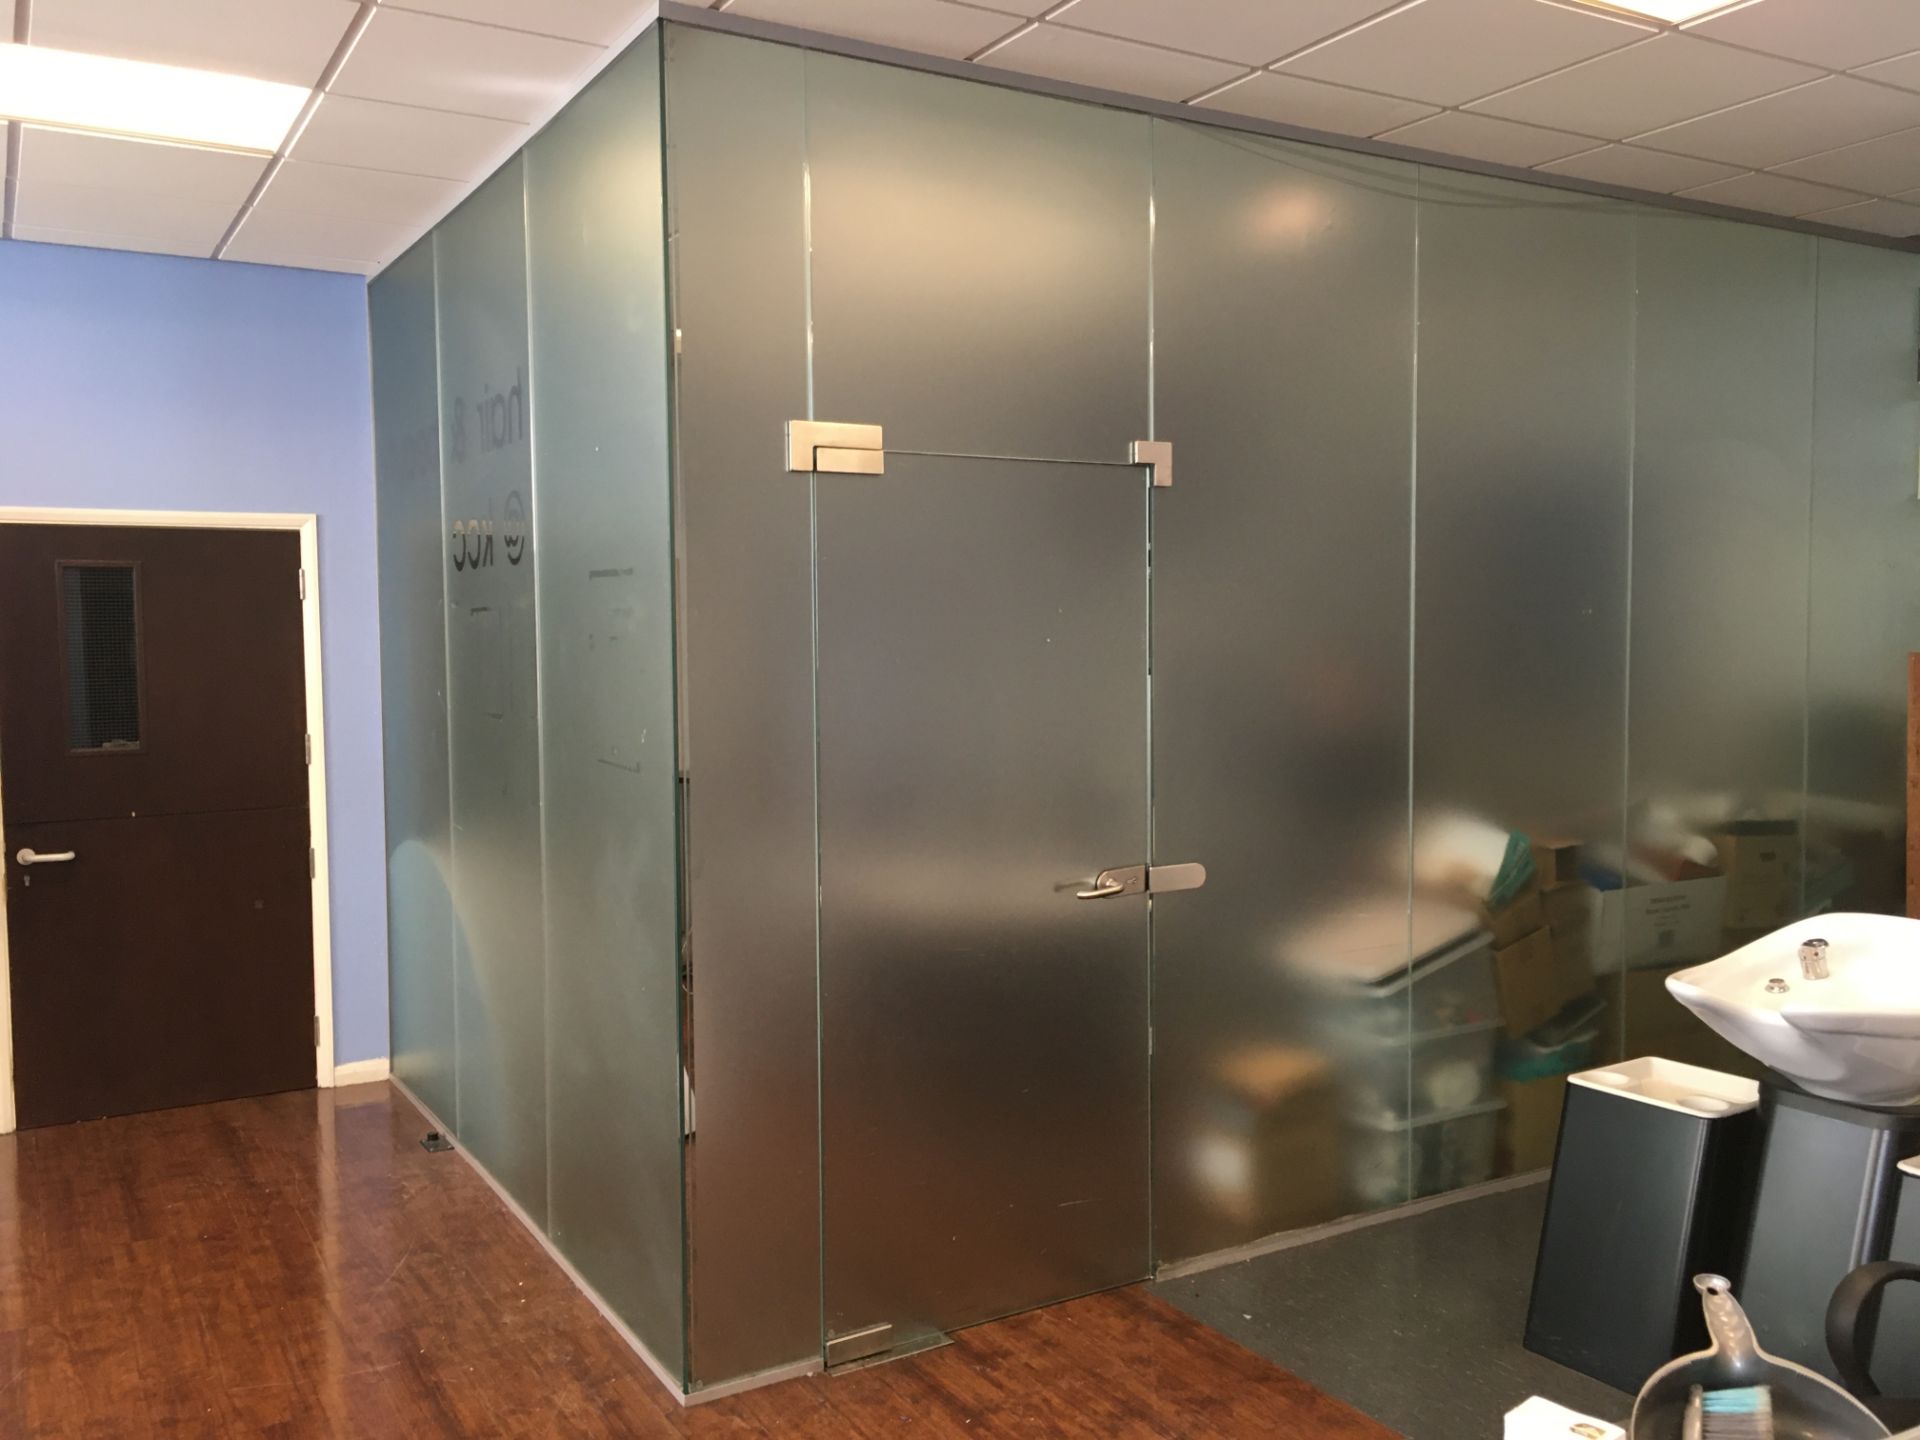 Toughend Glass 2 Sided Partition Wall with Single Door - Image 3 of 4